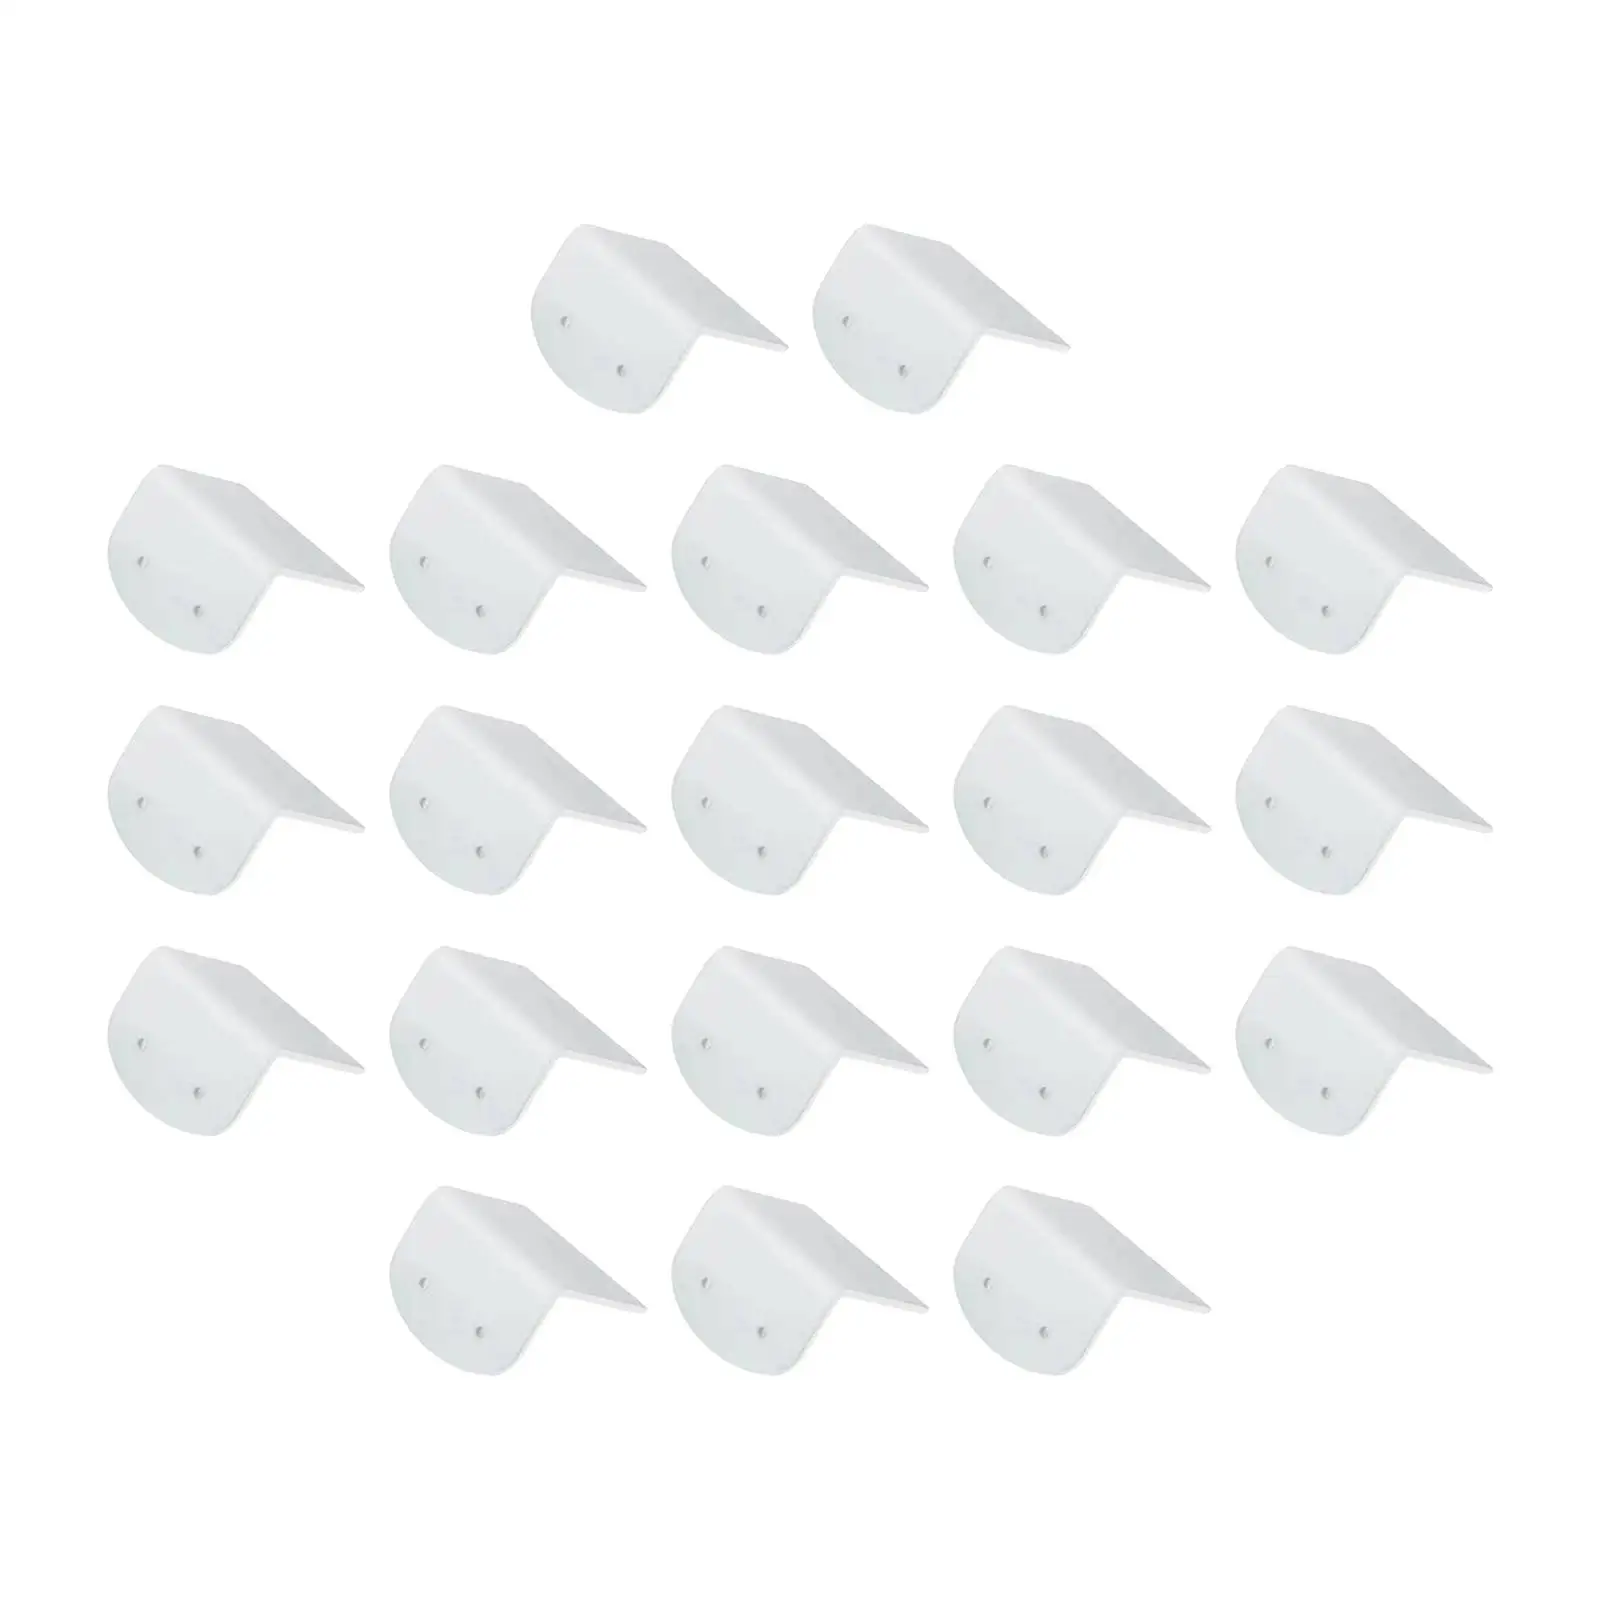 20Pcs Acrylic Earring Cards White Ear Hooks Organizer Durable Ear Loops Display Accessory Lightweight Storage for Shop Showcase